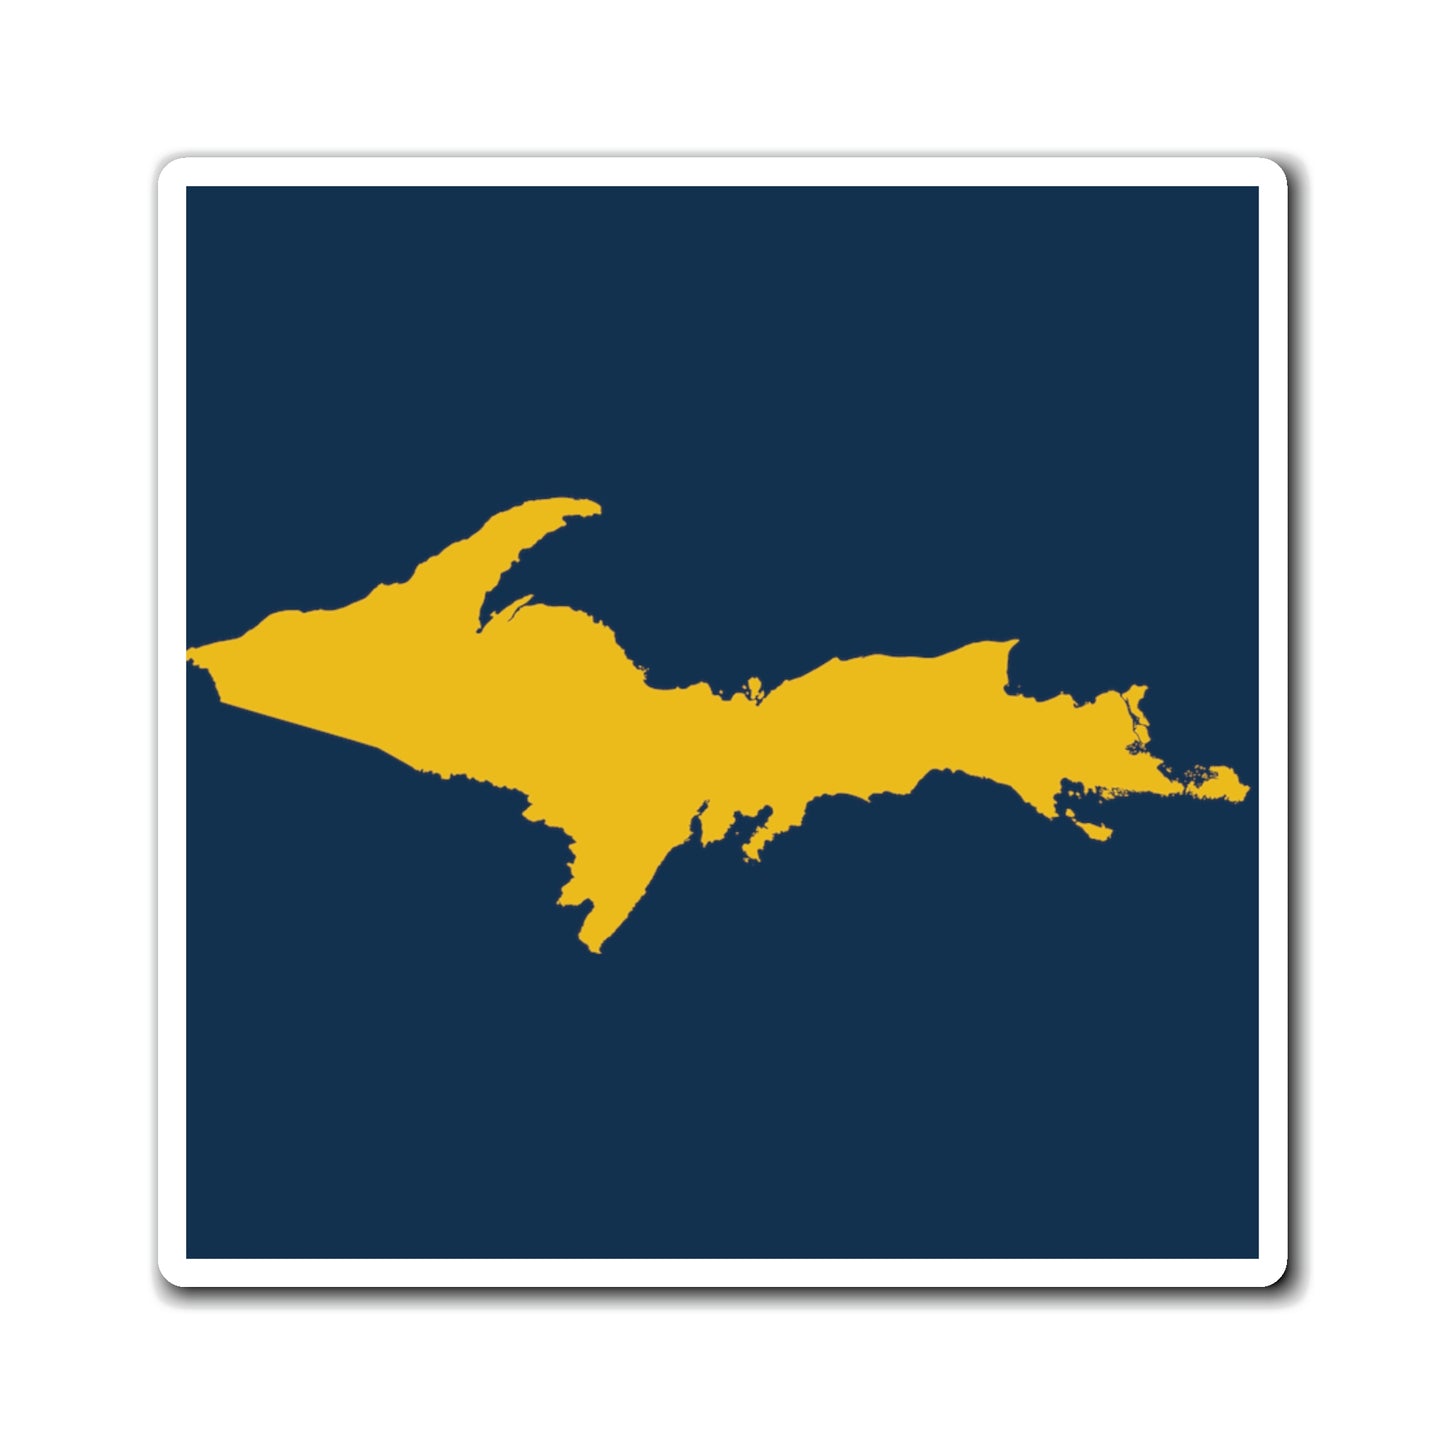 Michigan Upper Peninsula Square Magnet (Navy w/ Gold UP Outline)